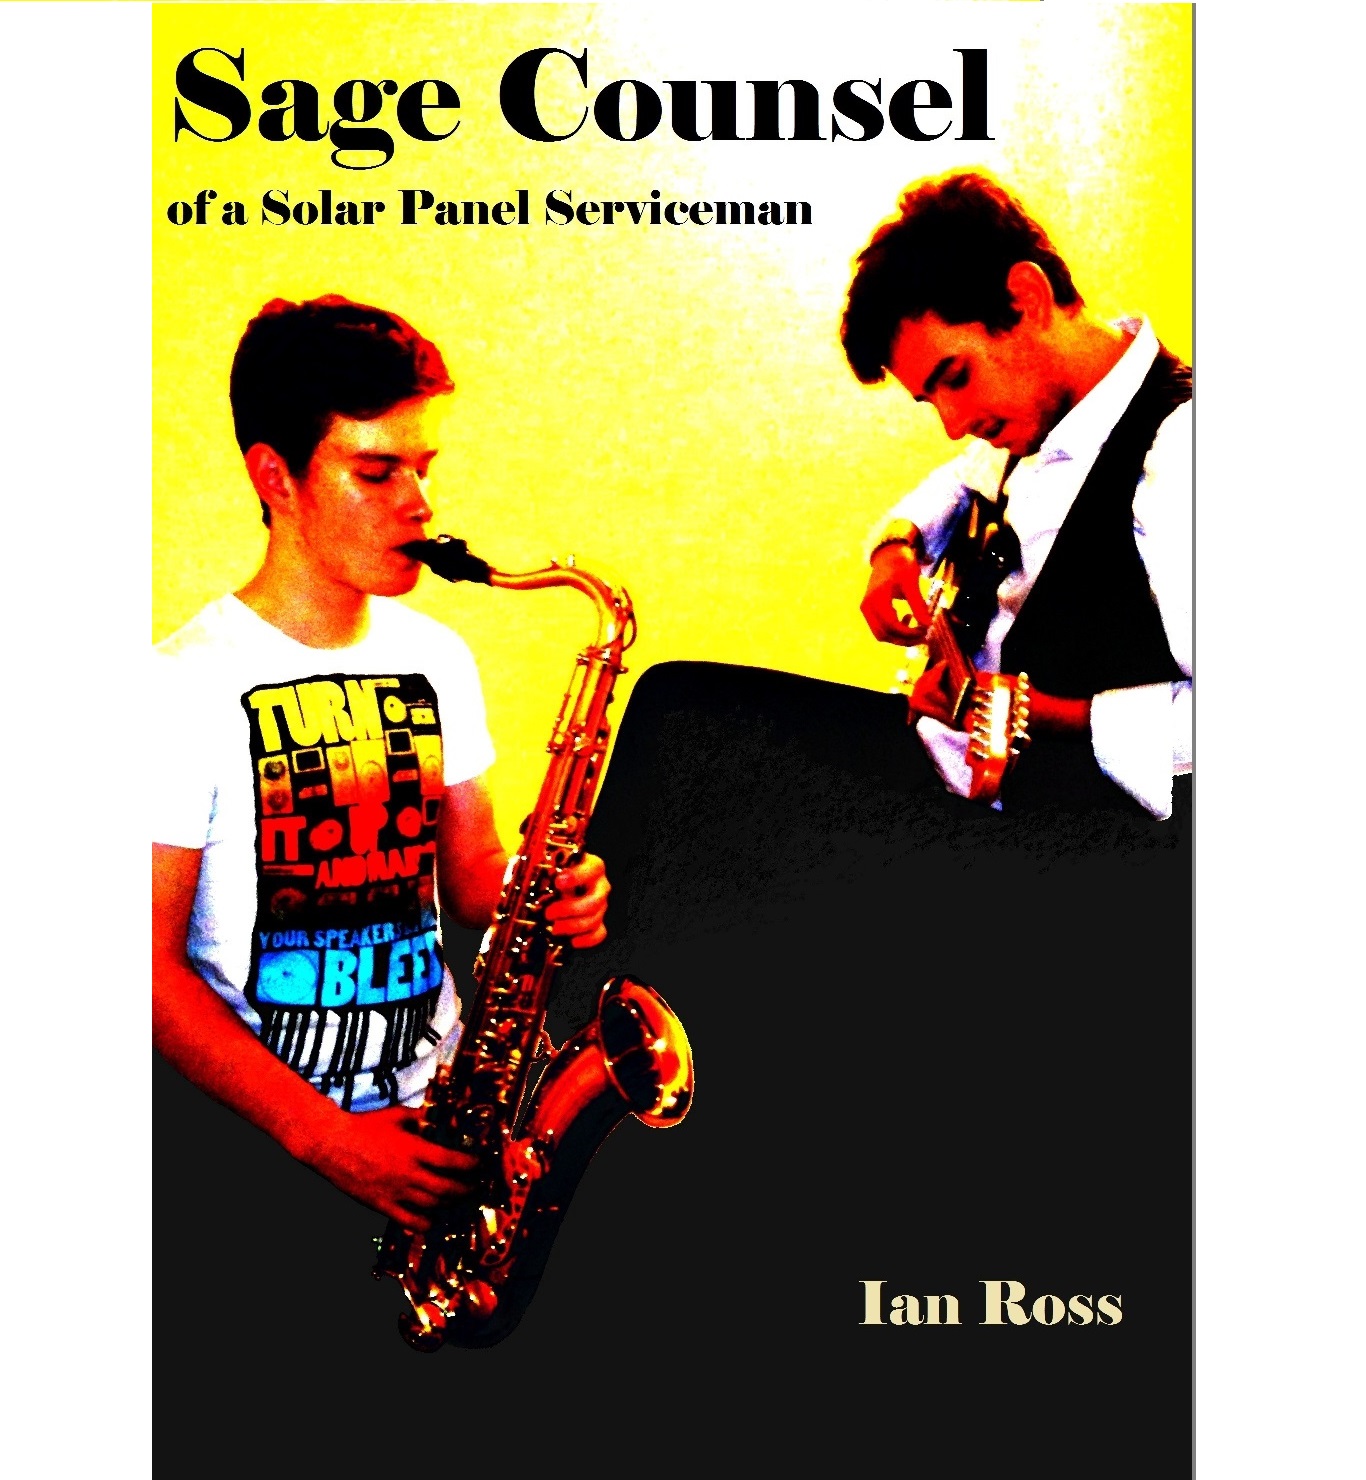 Sage Counsel Bookcover